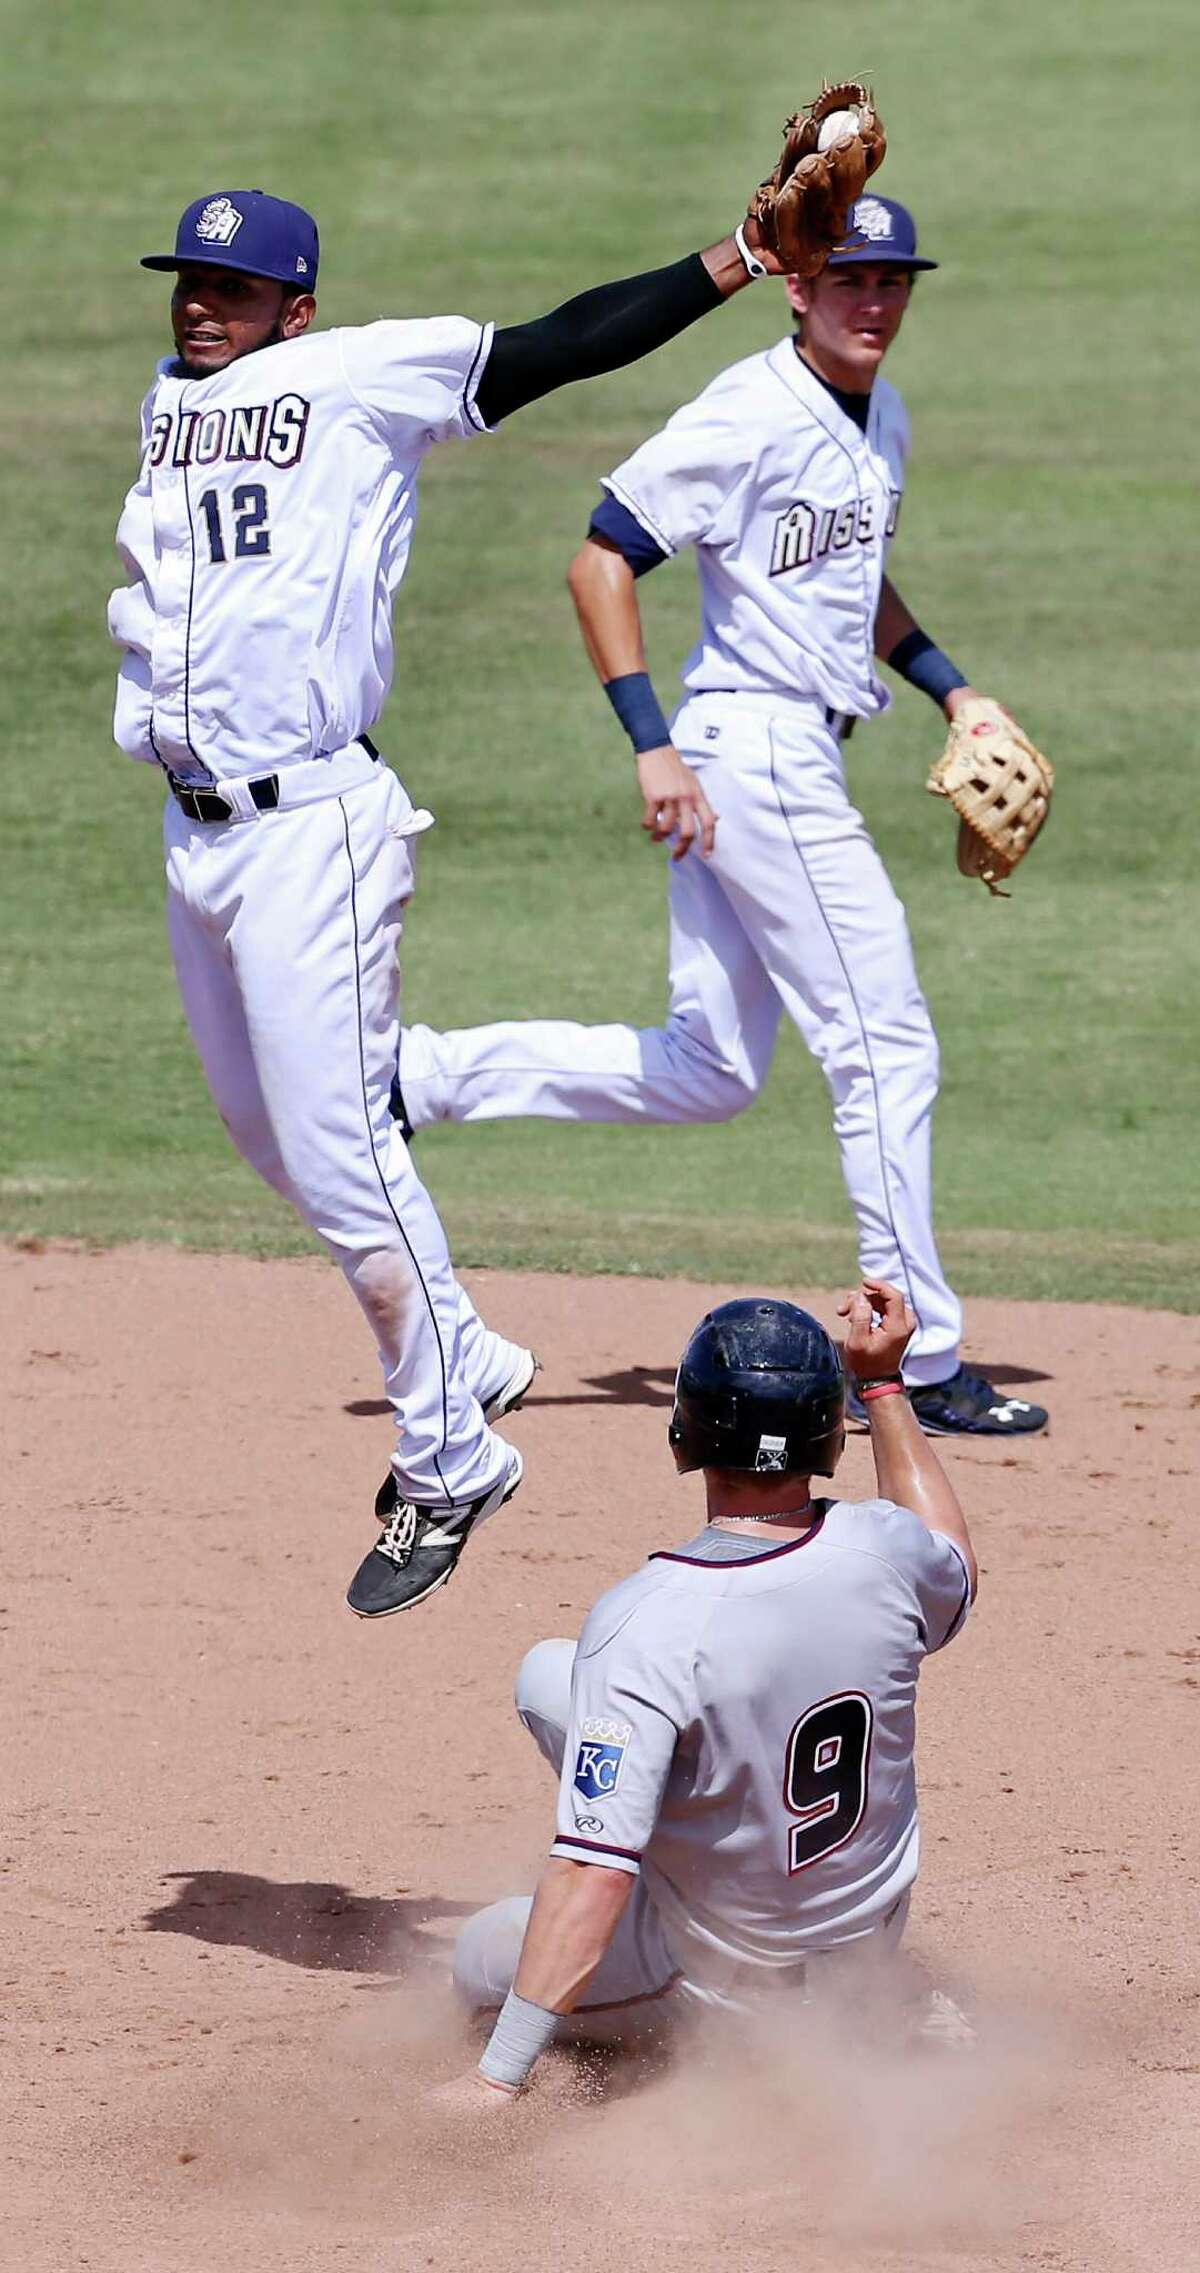 Northwest Arkansas Naturals' Hunter Dozier steals second under Missions' Rey Bruguera as Missions' Trea Turner (rear) looks on during the eight inning Sunday June 7, 2015 at Nelson W. Wolff Municipal Stadium. The Missions won 10-5.